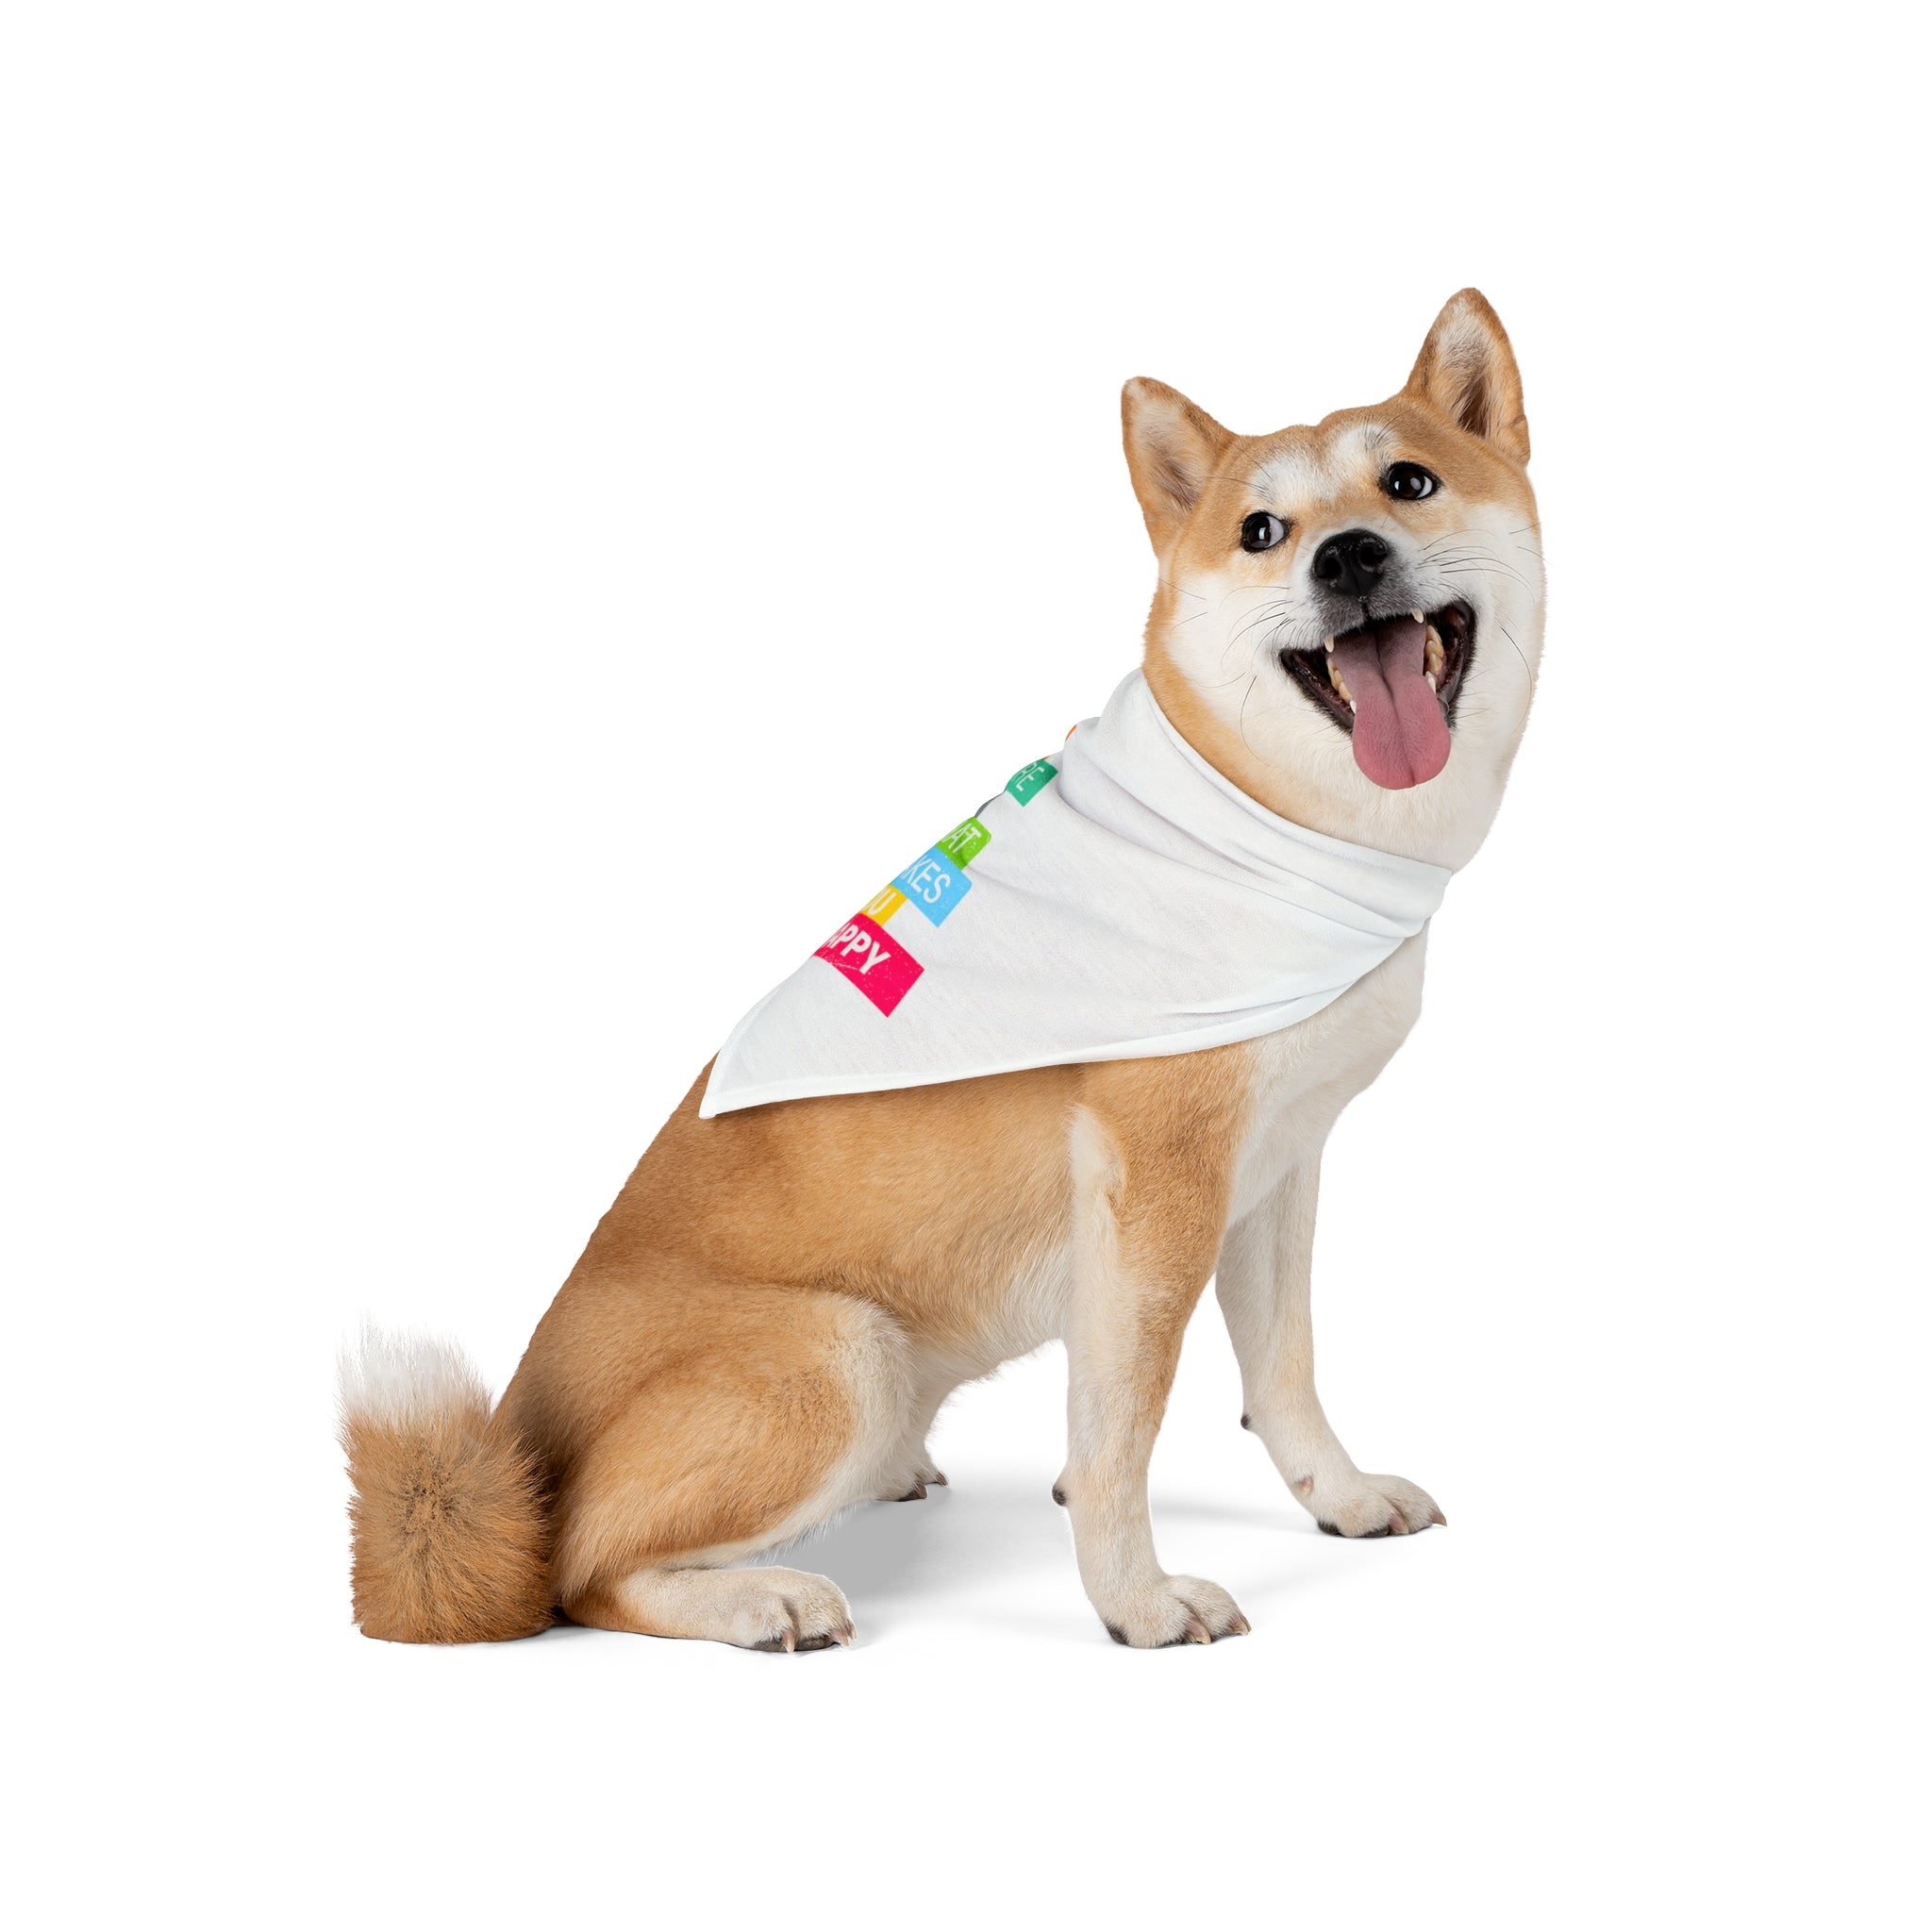 Do More of What Makes You Happy - Pet Bandana